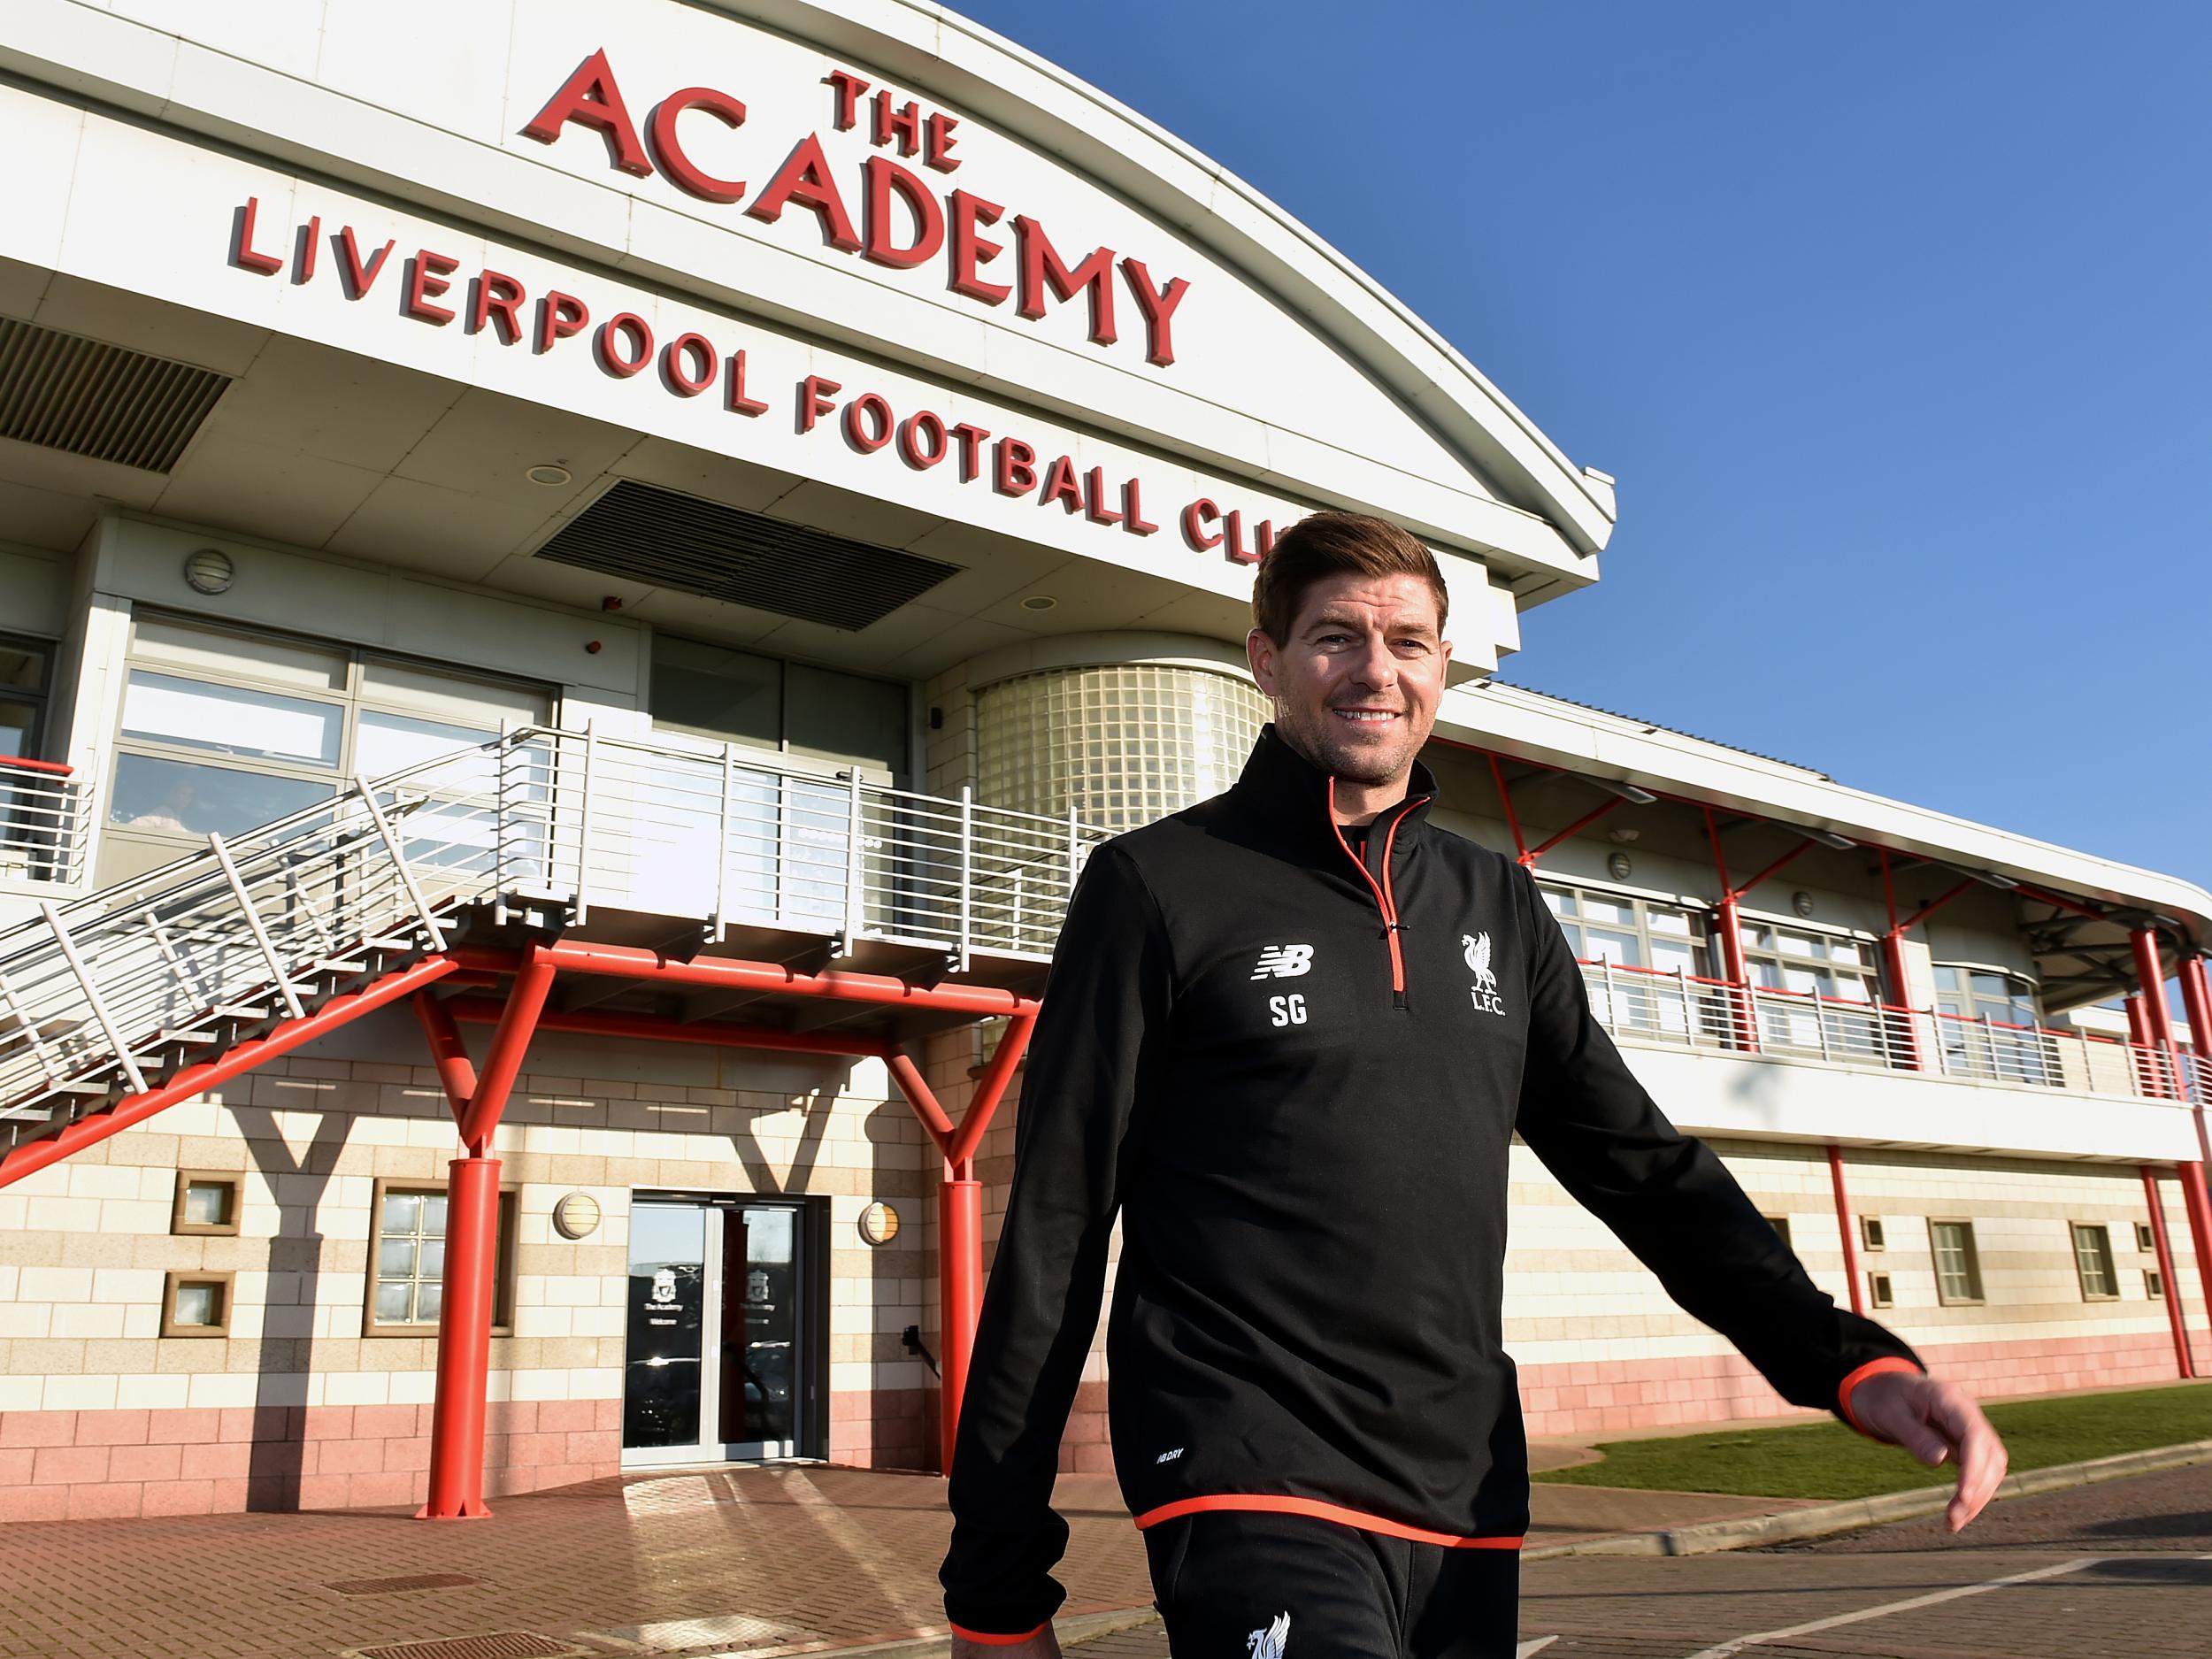 Gerrard is hoping to take charge of his own youth team for next season